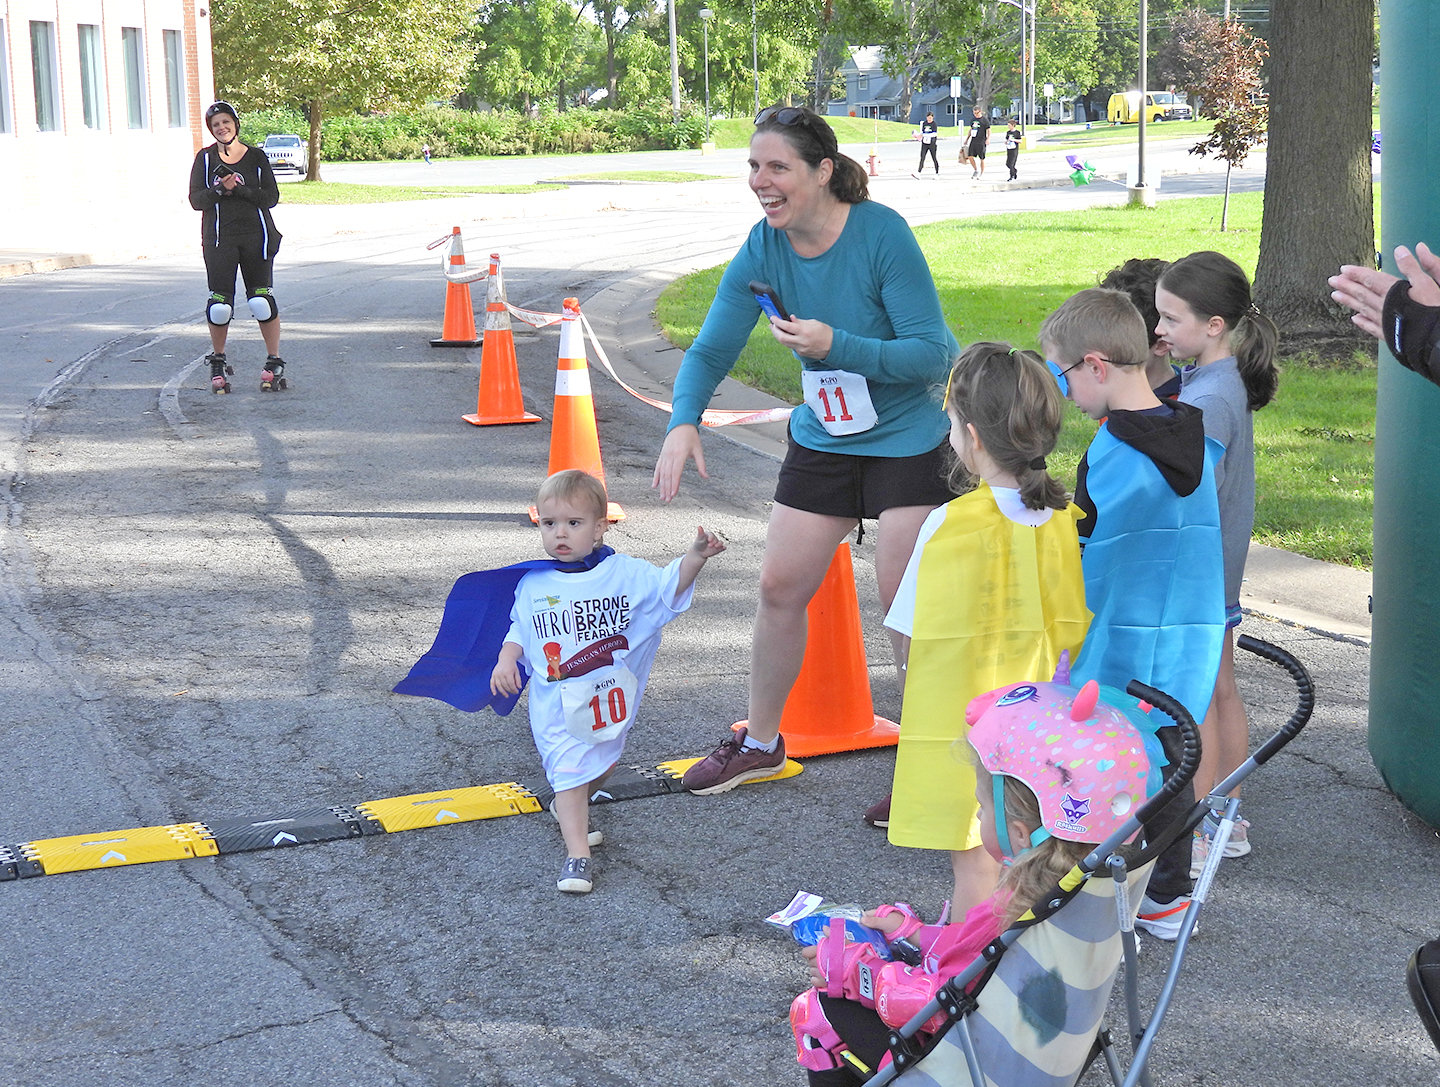 YOUNG AND RUNNING — A young child makes it across the finish line at Jessica’s Heroes 5K Walk and Run. Besides raising money, Jessica’s Heroes helps unite people and show local cancer victims that the community is there to support them.